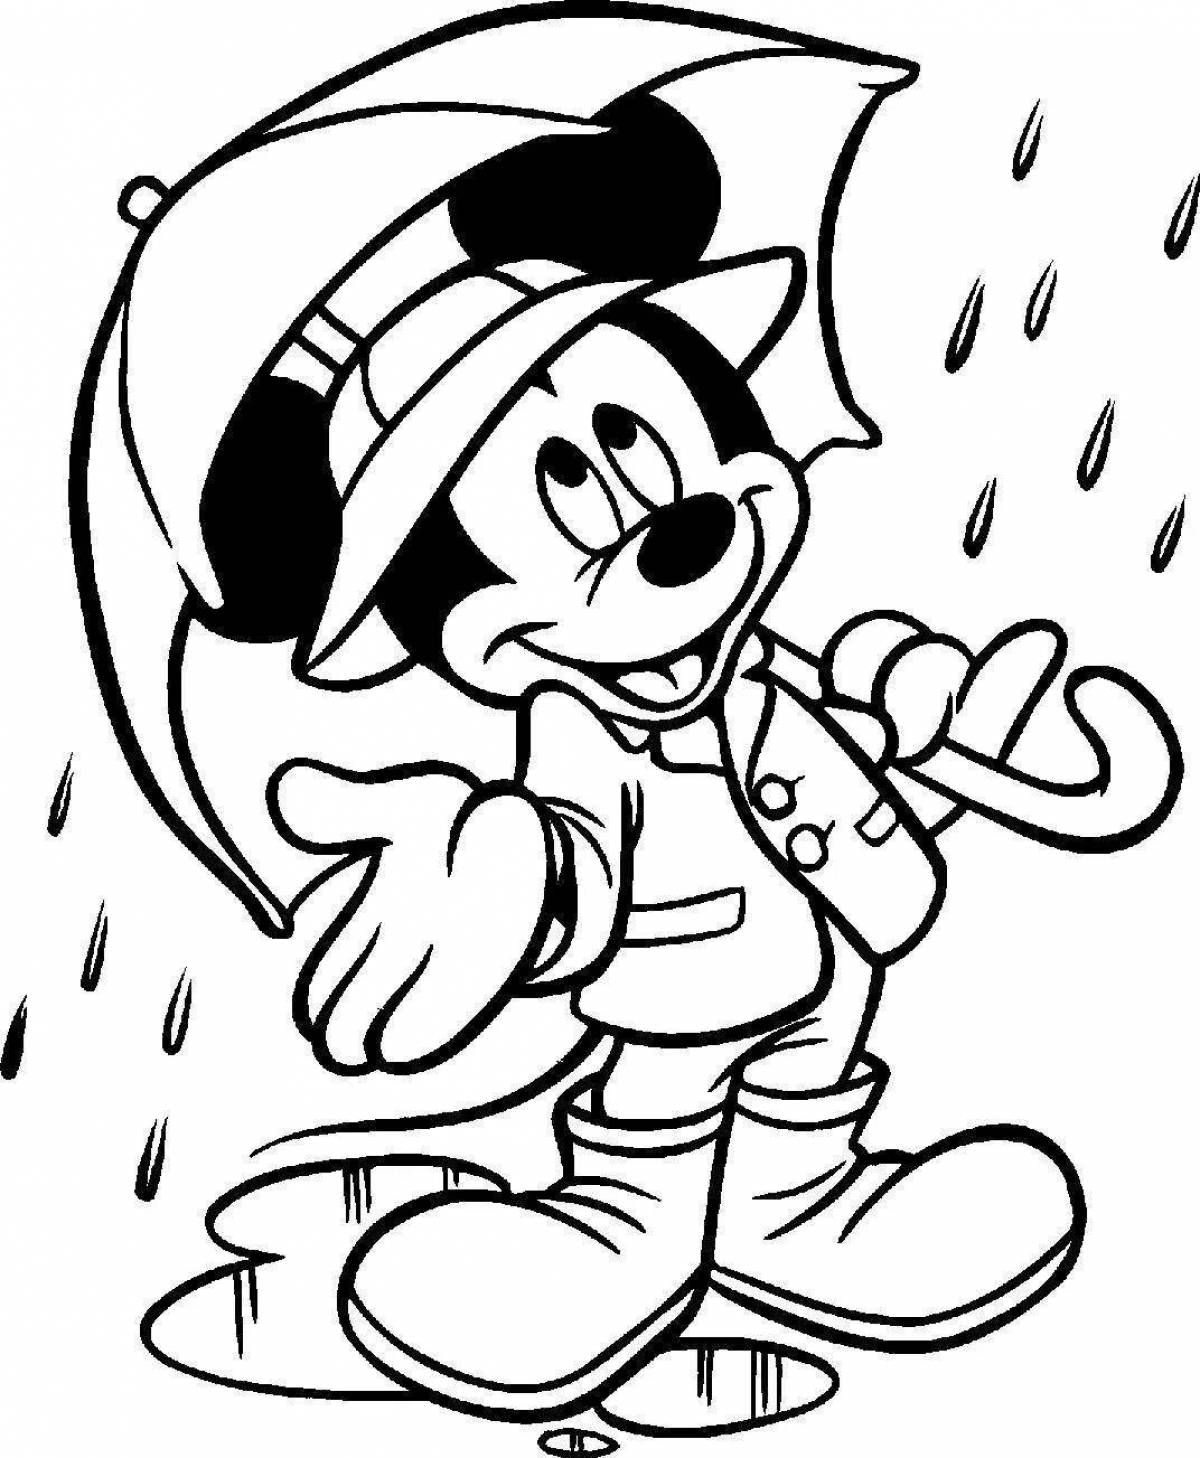 Attractive cartoon character coloring page